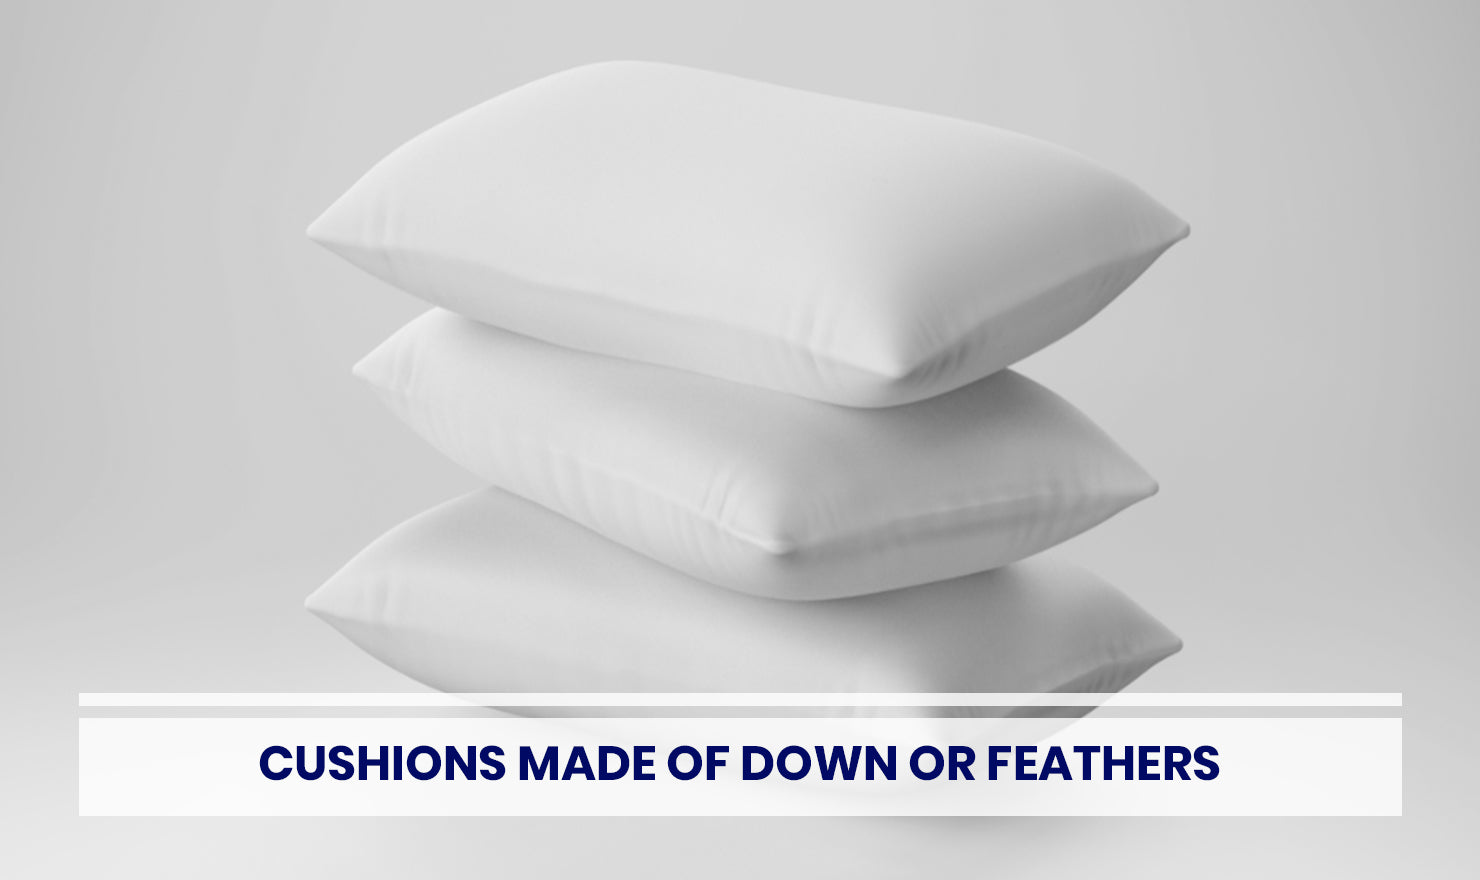 Cushions made of down or feathers